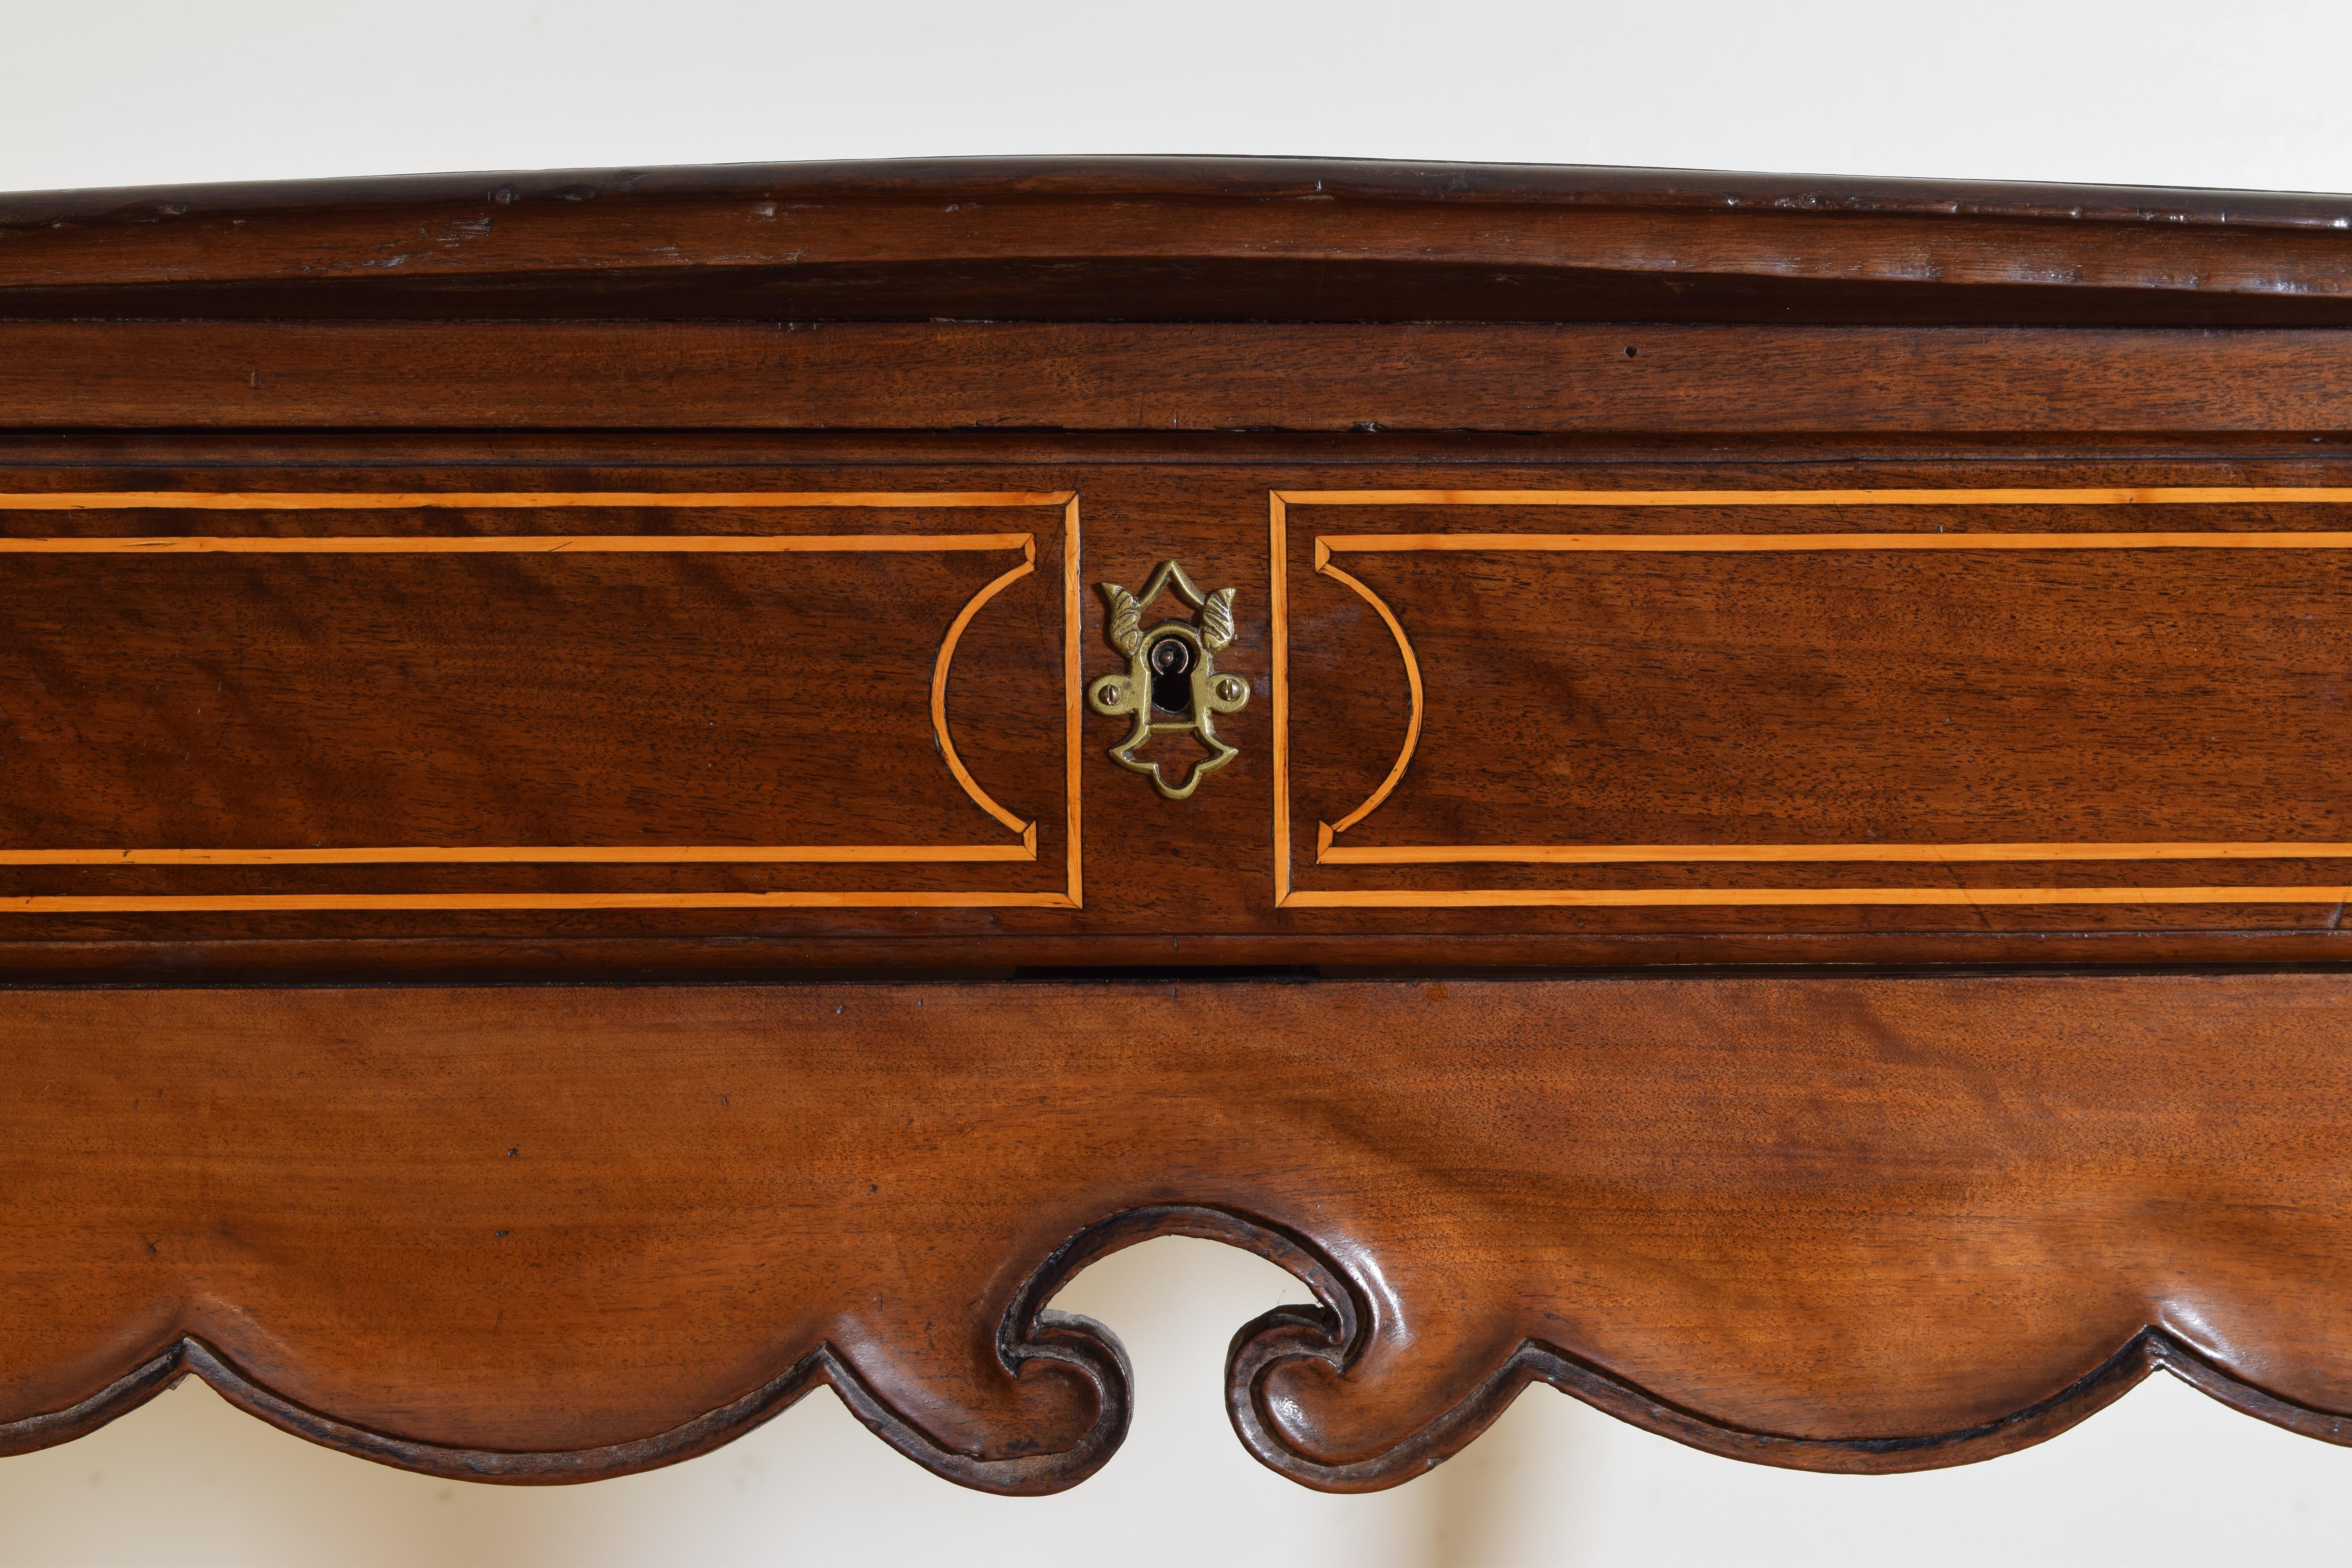 Portuguese Rococo Period Carved Walnut & Inlaid 1-Drawer Console, mid 18th cen. For Sale 4